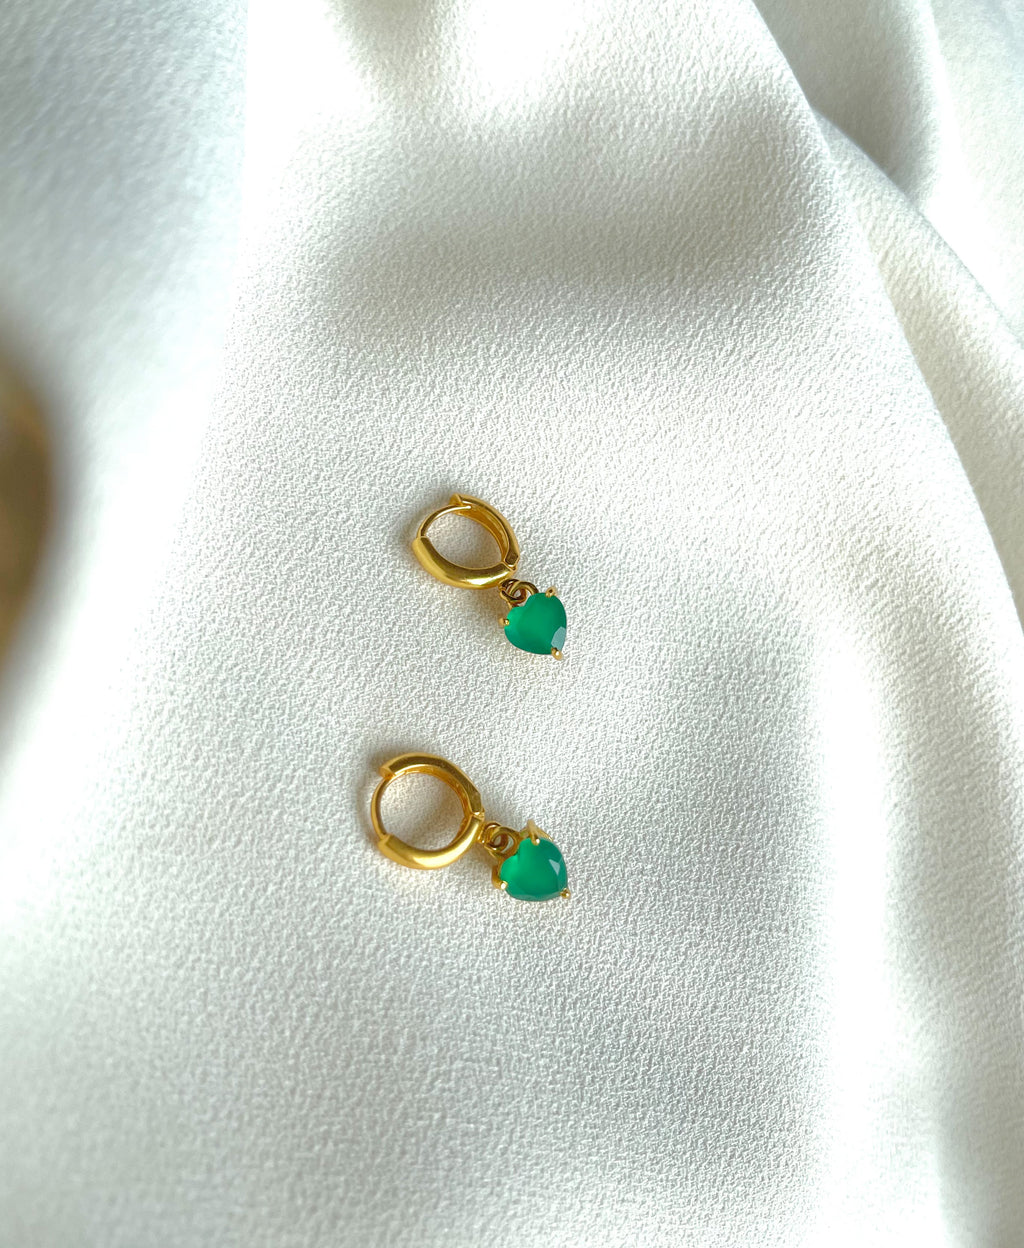 A little more love - Green Onyx